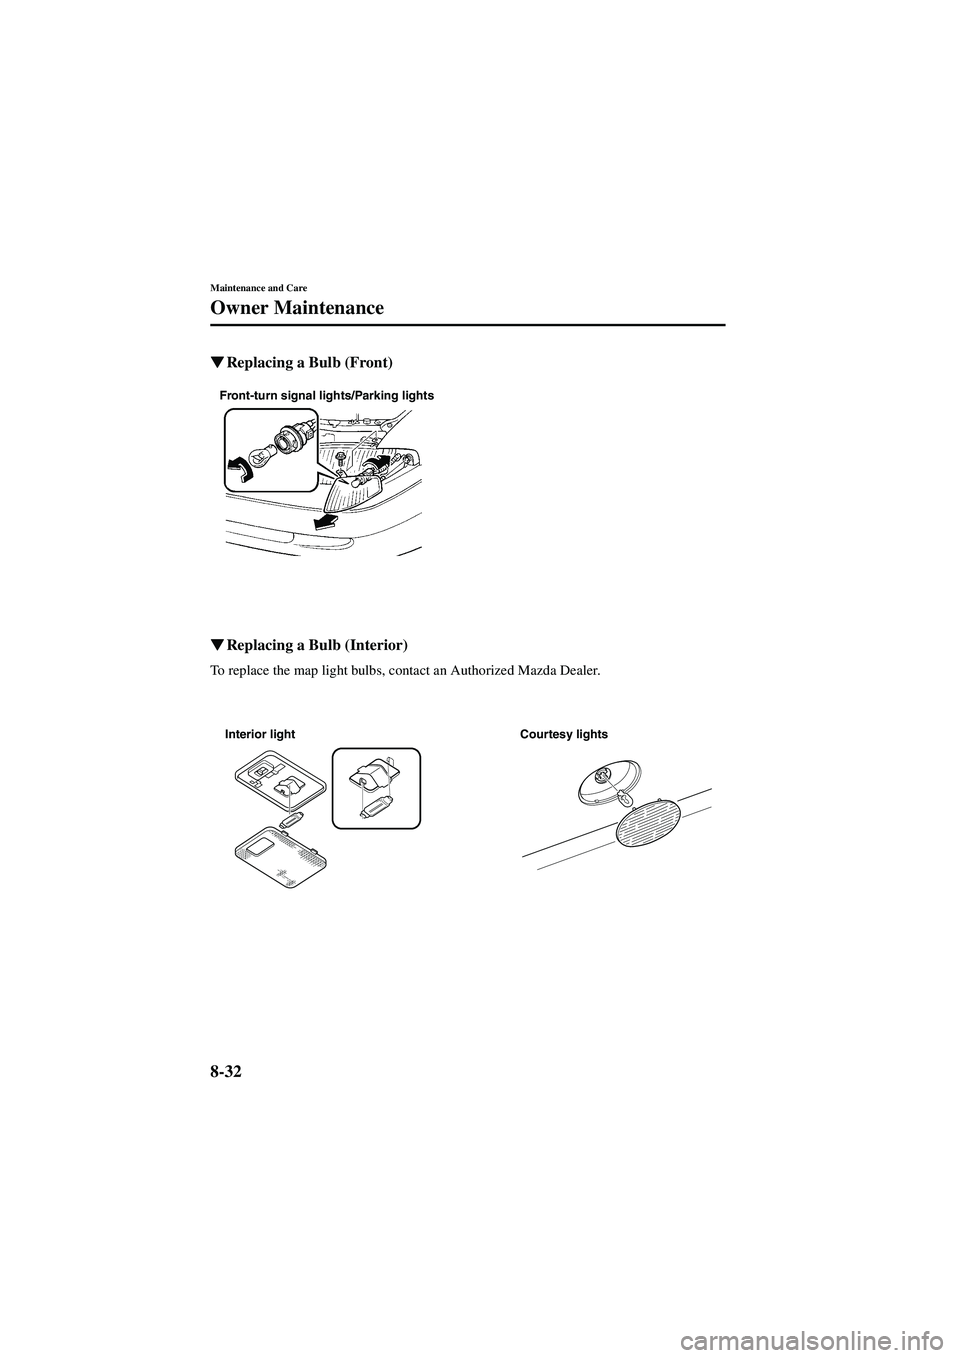 MAZDA MODEL 626 2002  Owners Manual 8-32
Maintenance and Care
Owner Maintenance
Form No. 8Q50-EA-01G

  Replacing a Bulb (Front) 


 Replacing a Bulb (Interior) 
To replace the map light bulbs, contact an Authorized Mazda Dealer